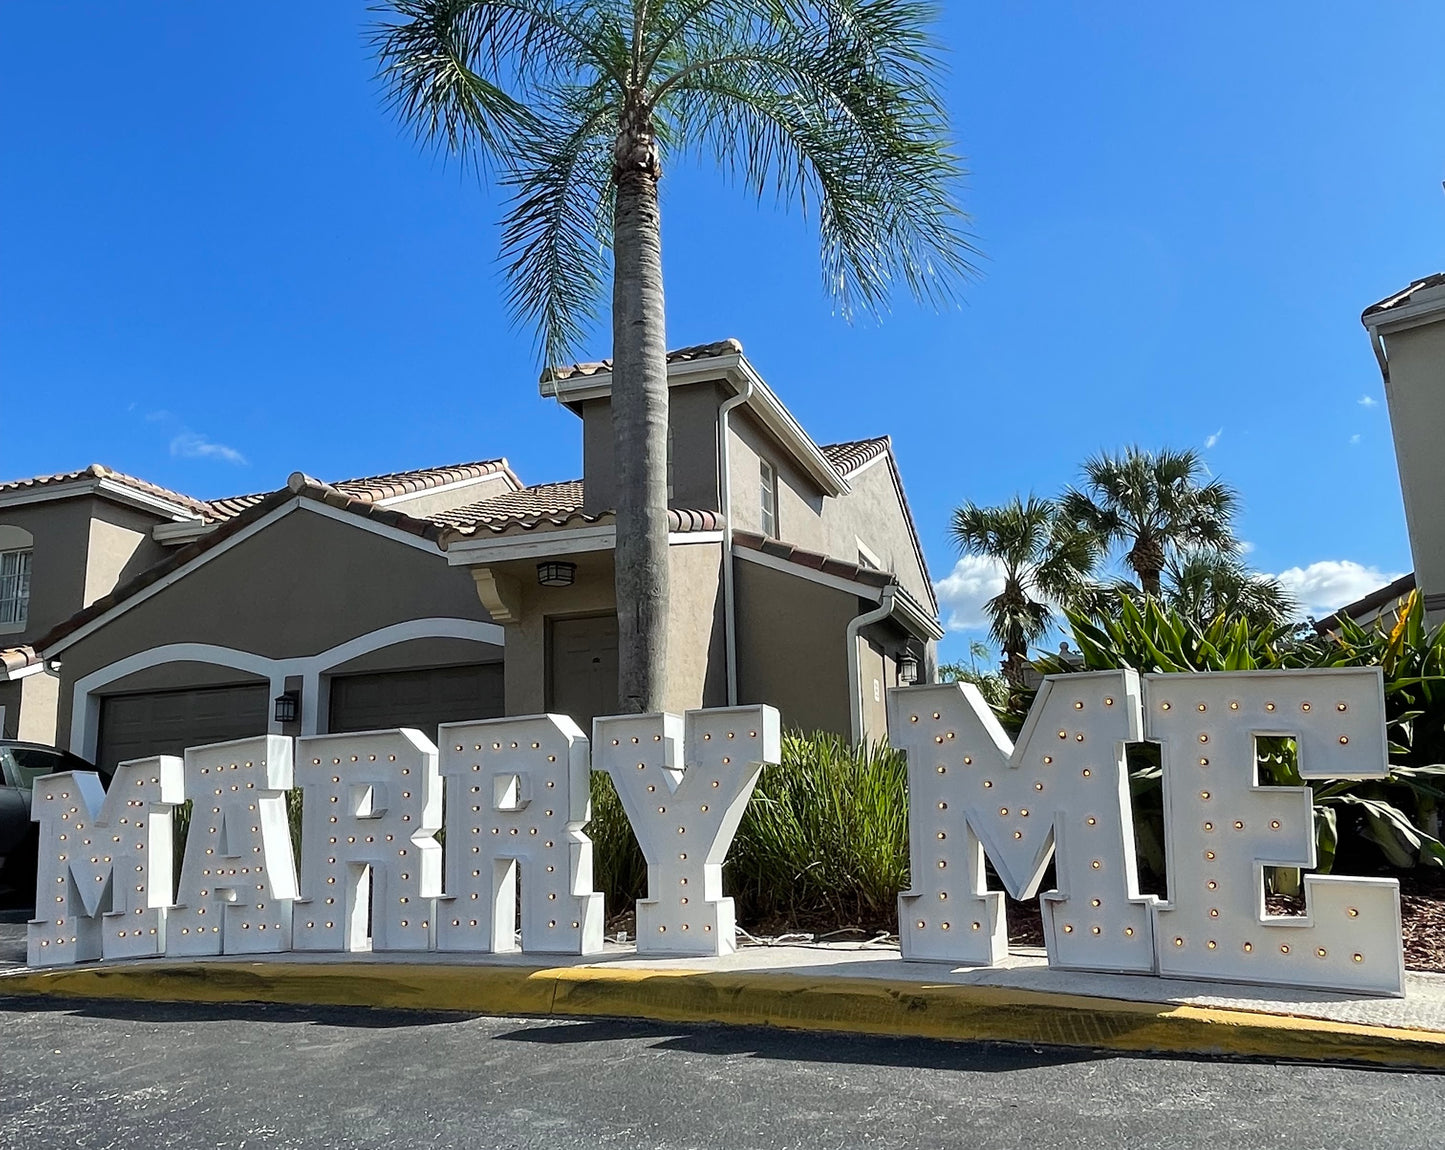 MARRY ME - Marquee Letters Rental - Light up!